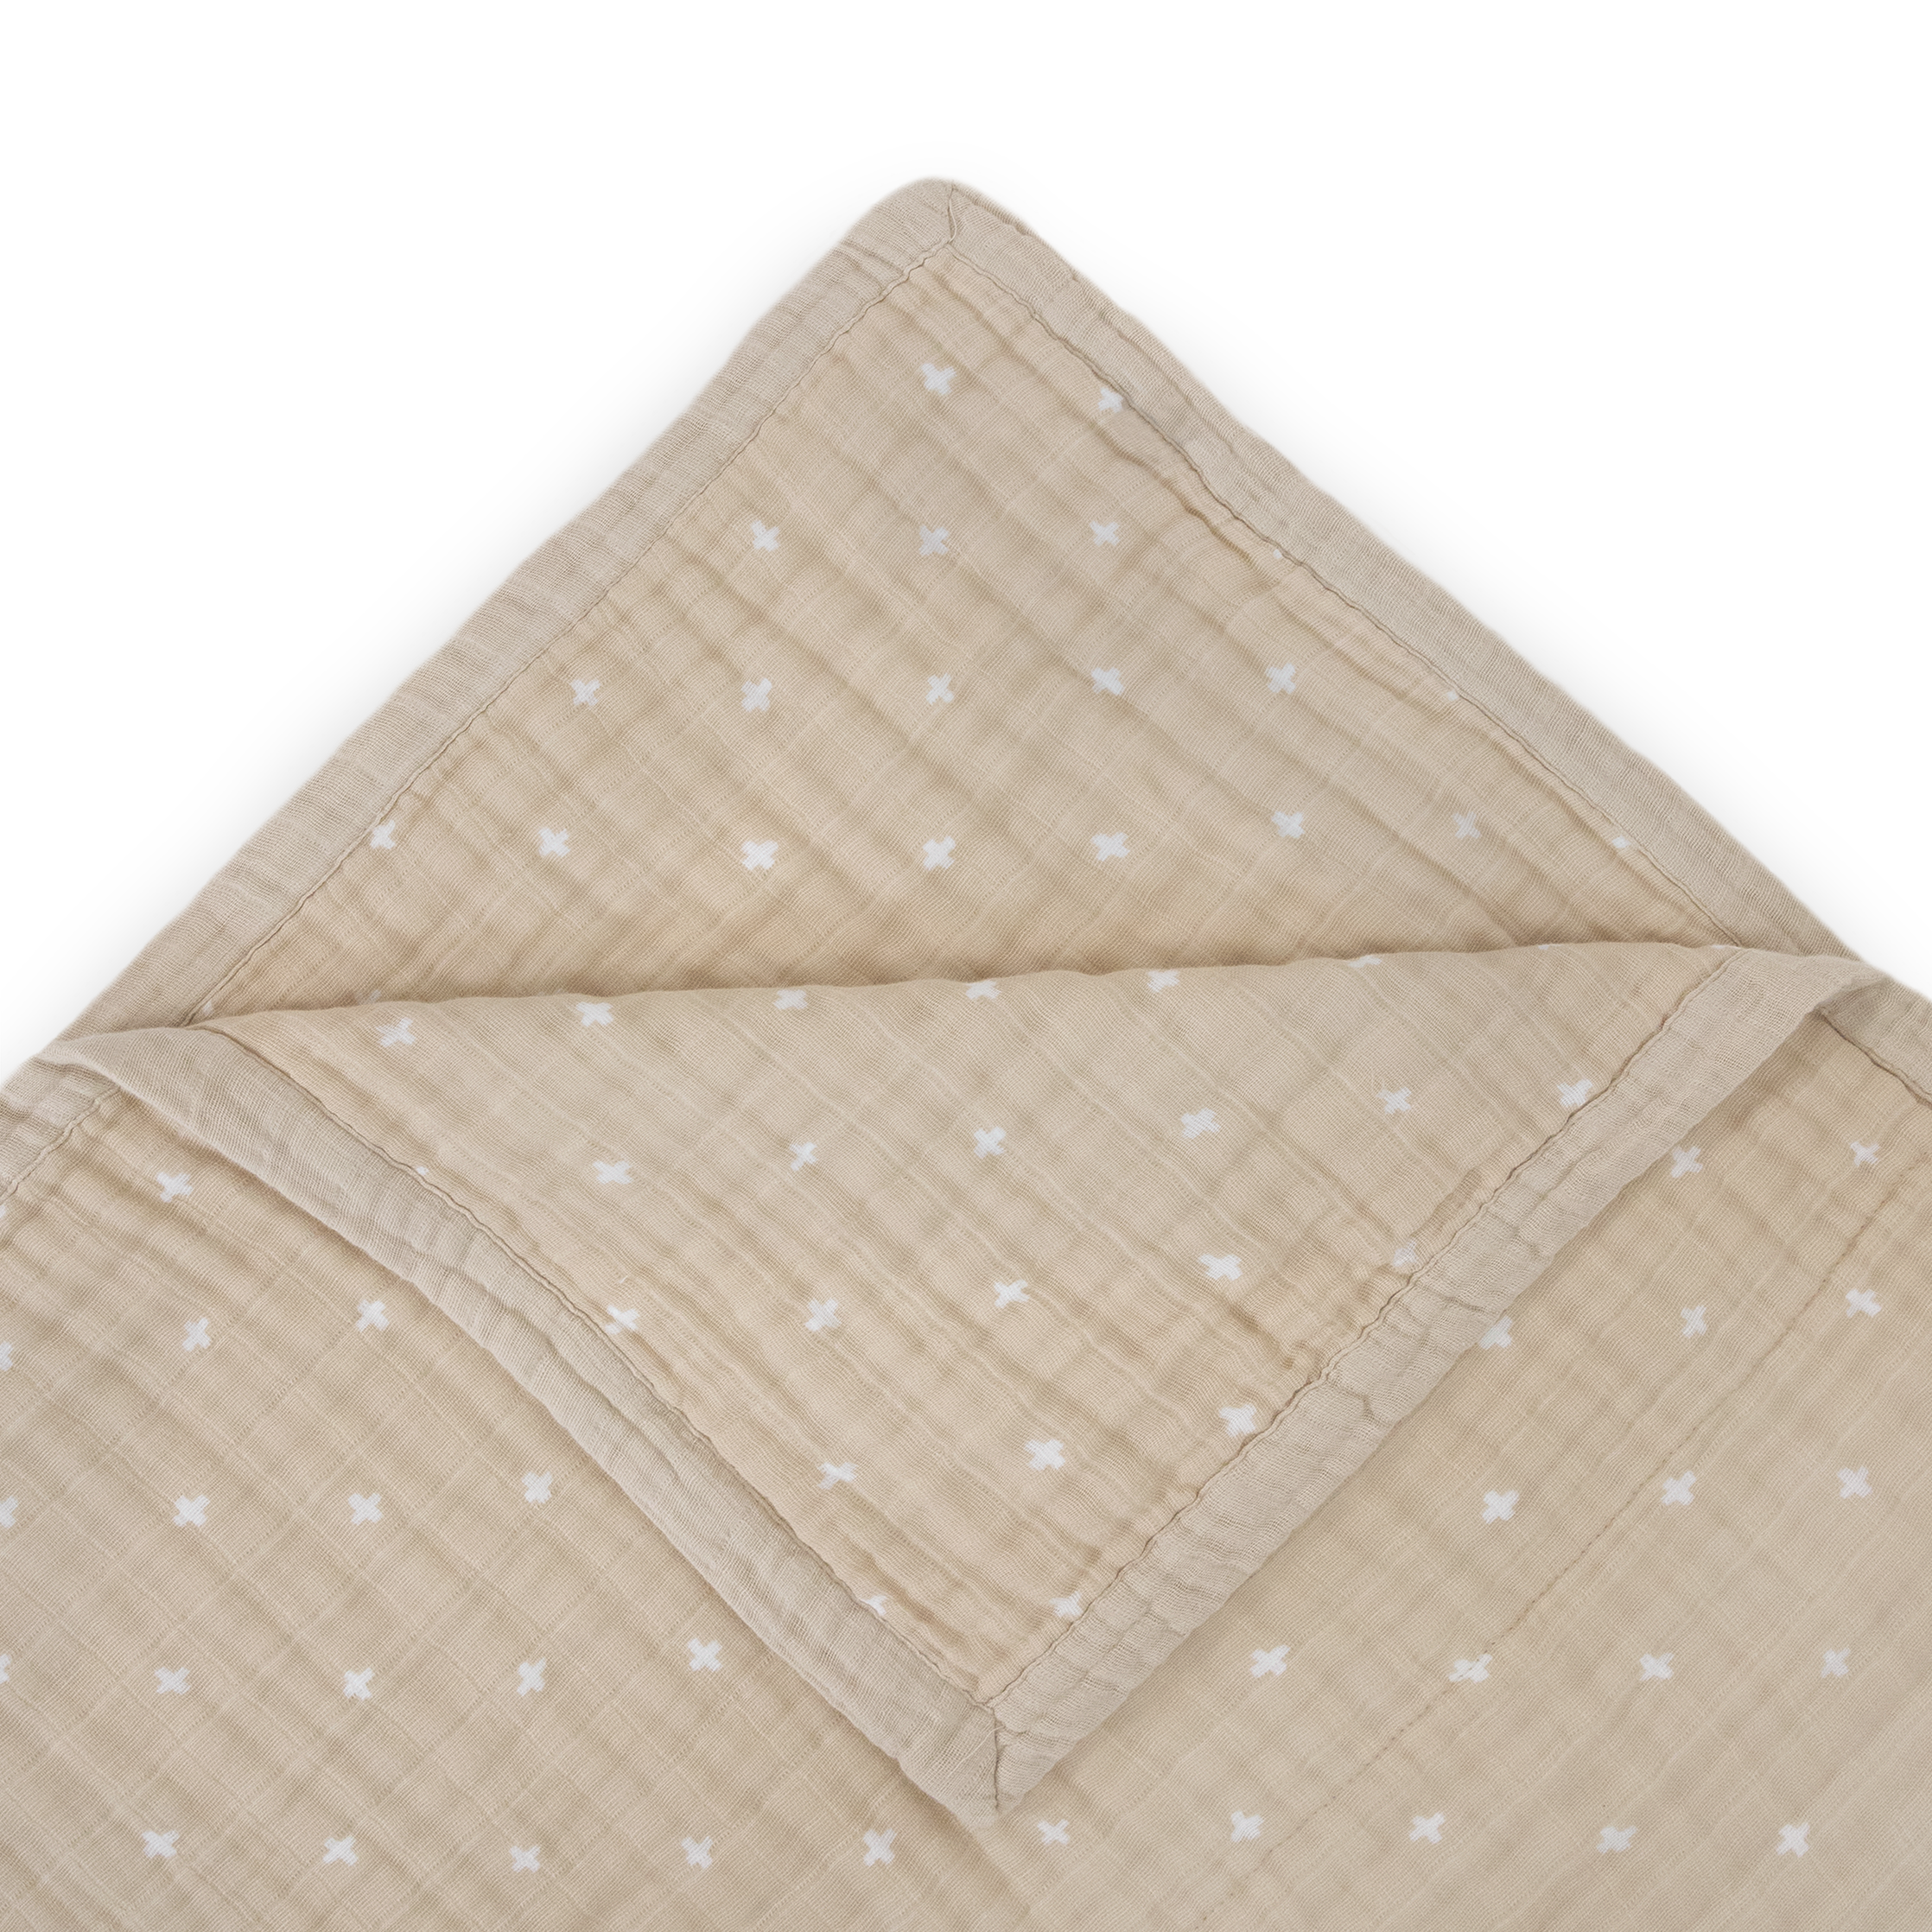 Cotton Muslin Quilted Throw - Taupe Cross